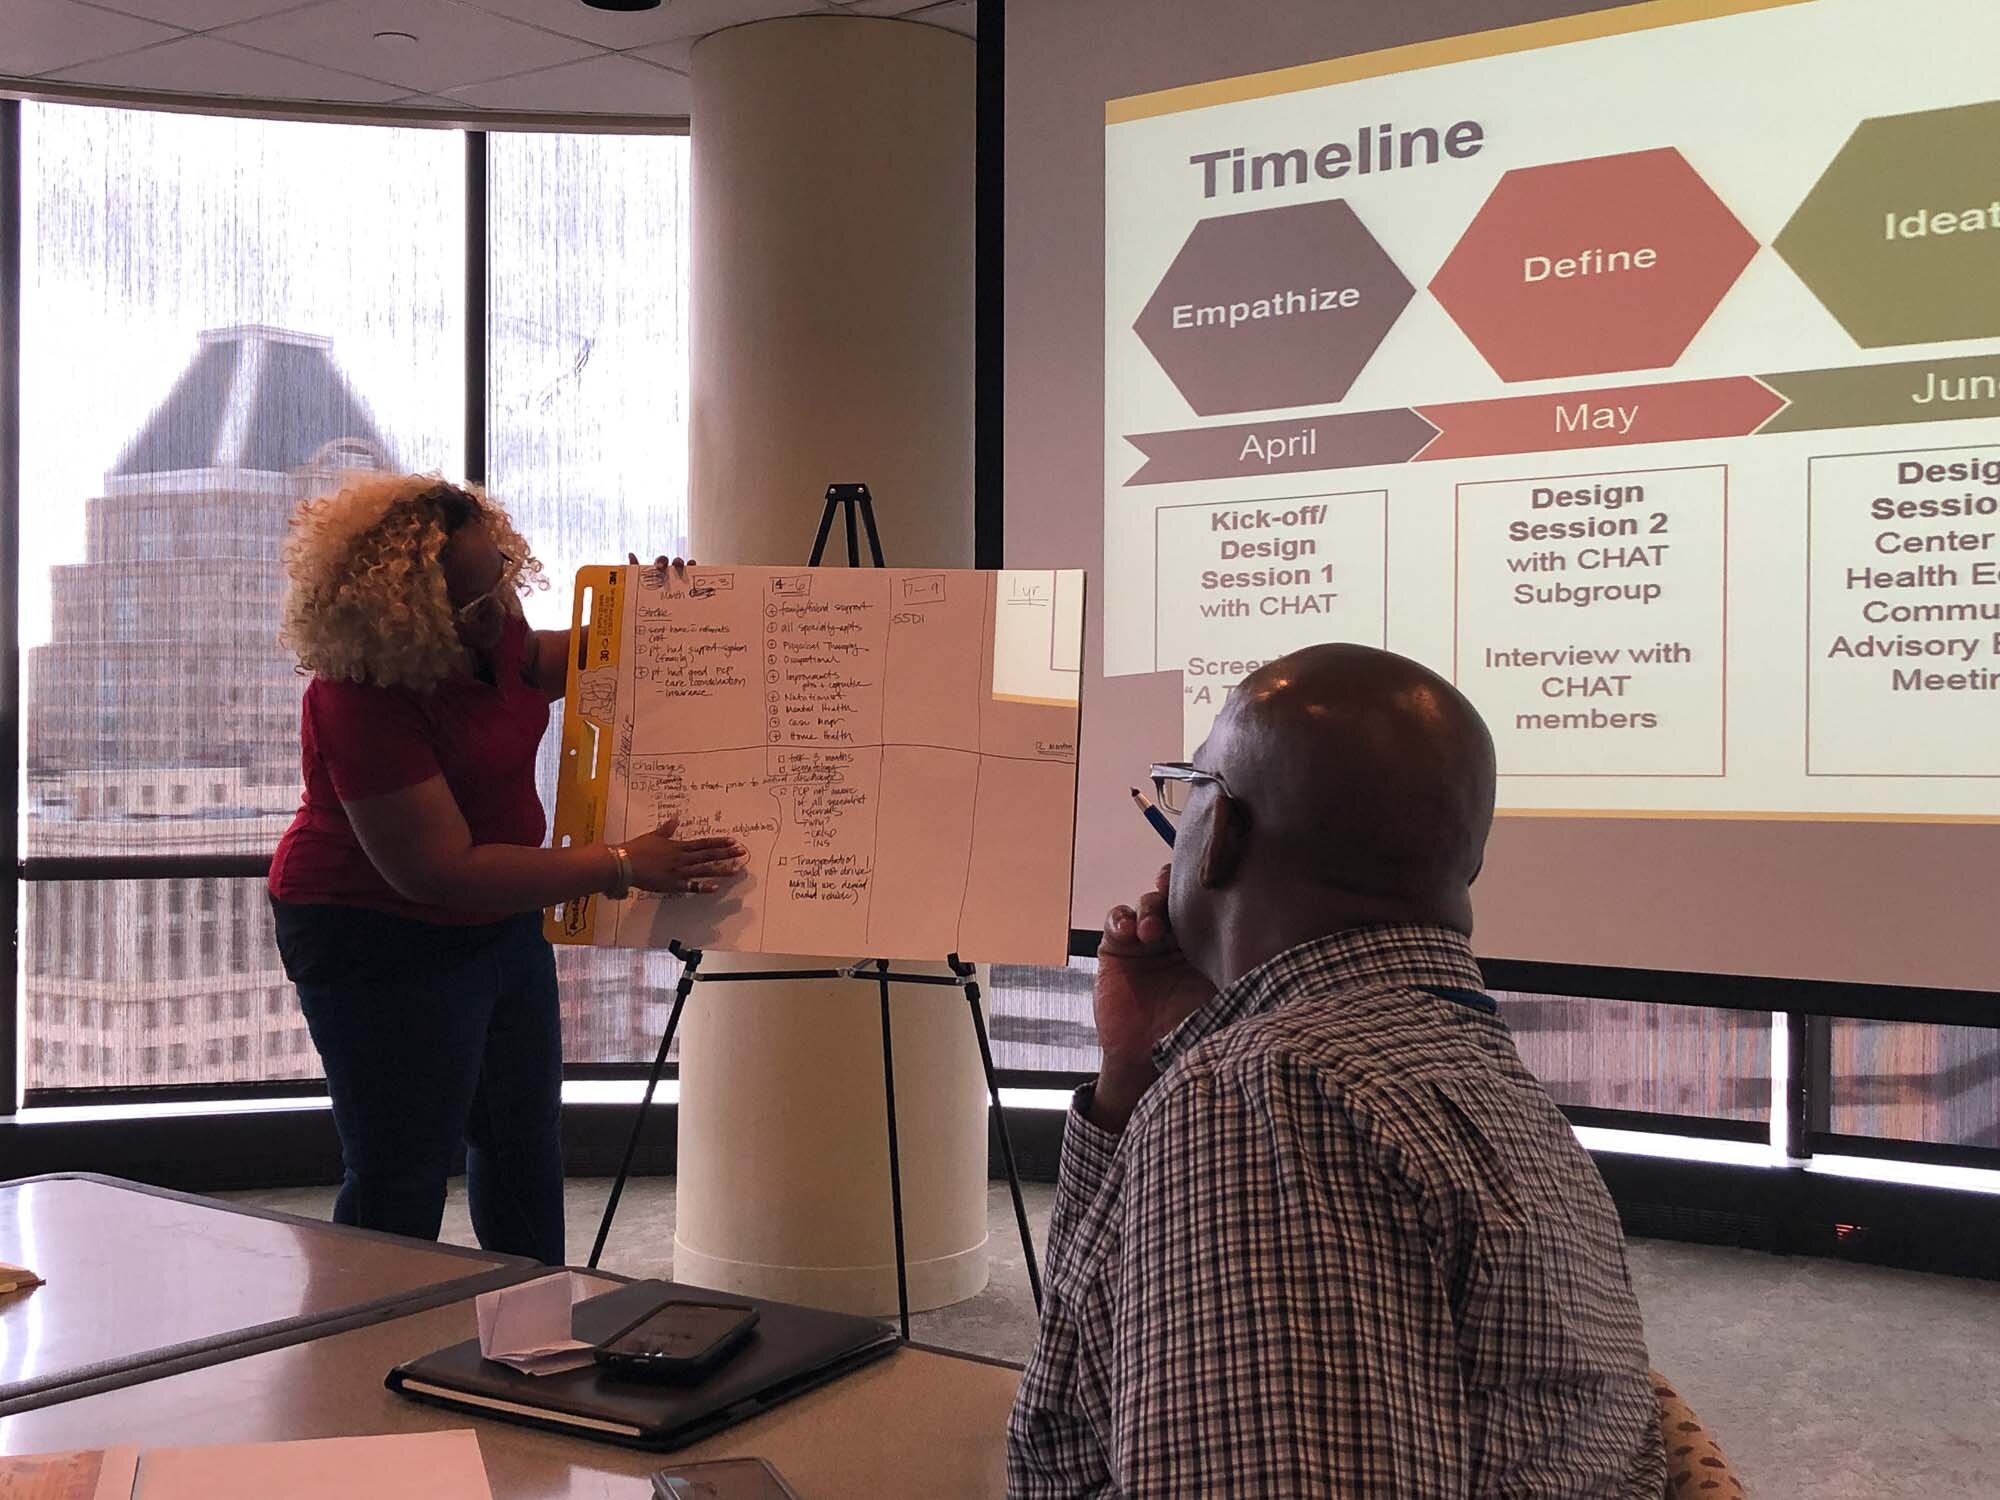  Human-centered design session by CHE team for American Health Association participants, April 2019 in Baltimore. 